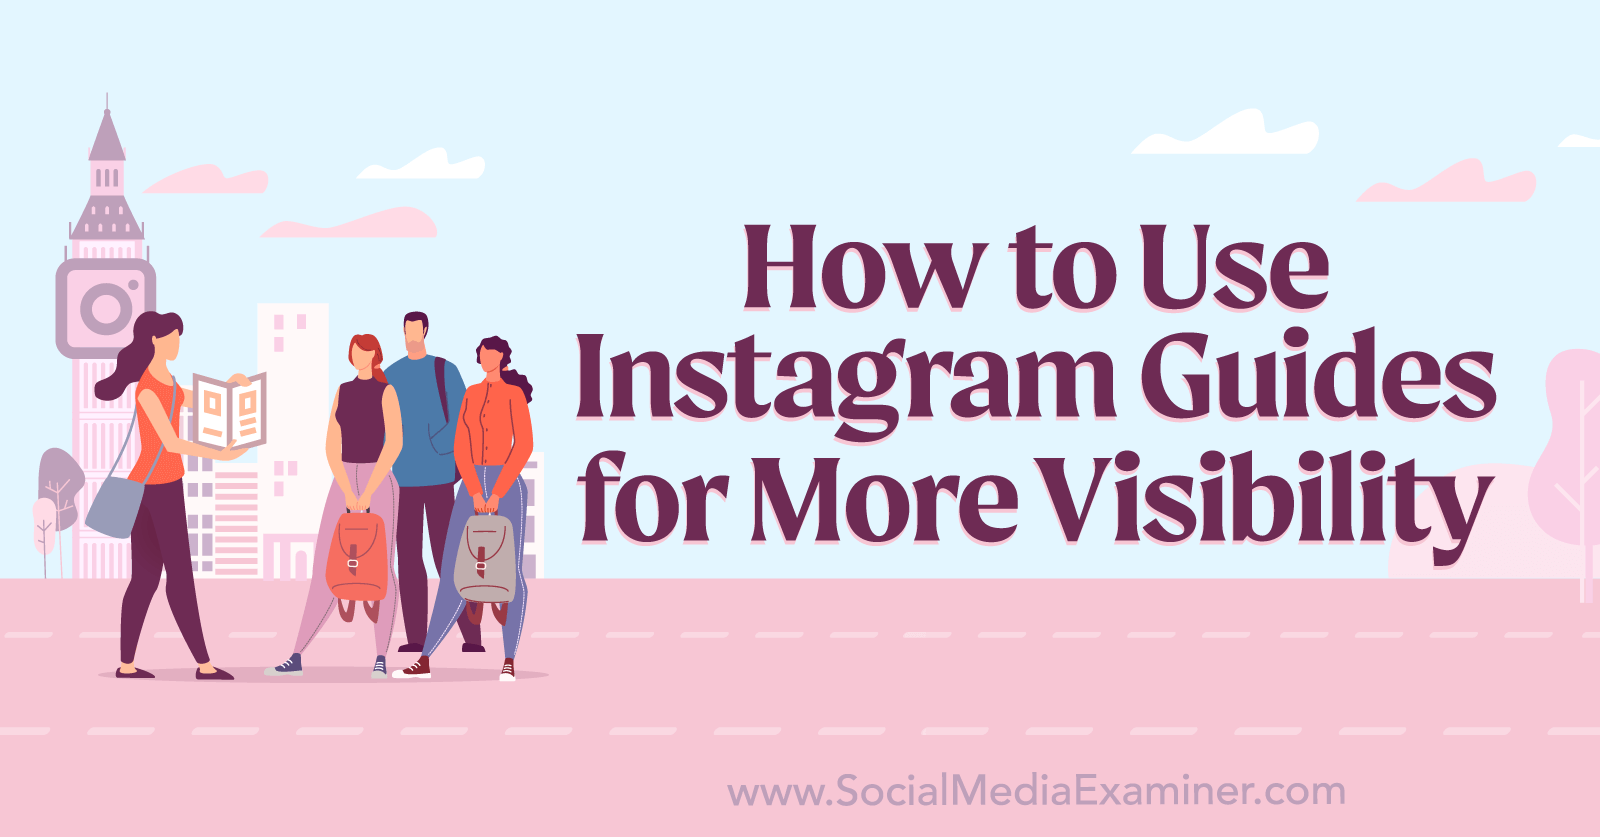 How to Use Instagram Guides for More Visibility by Social Media Examiner